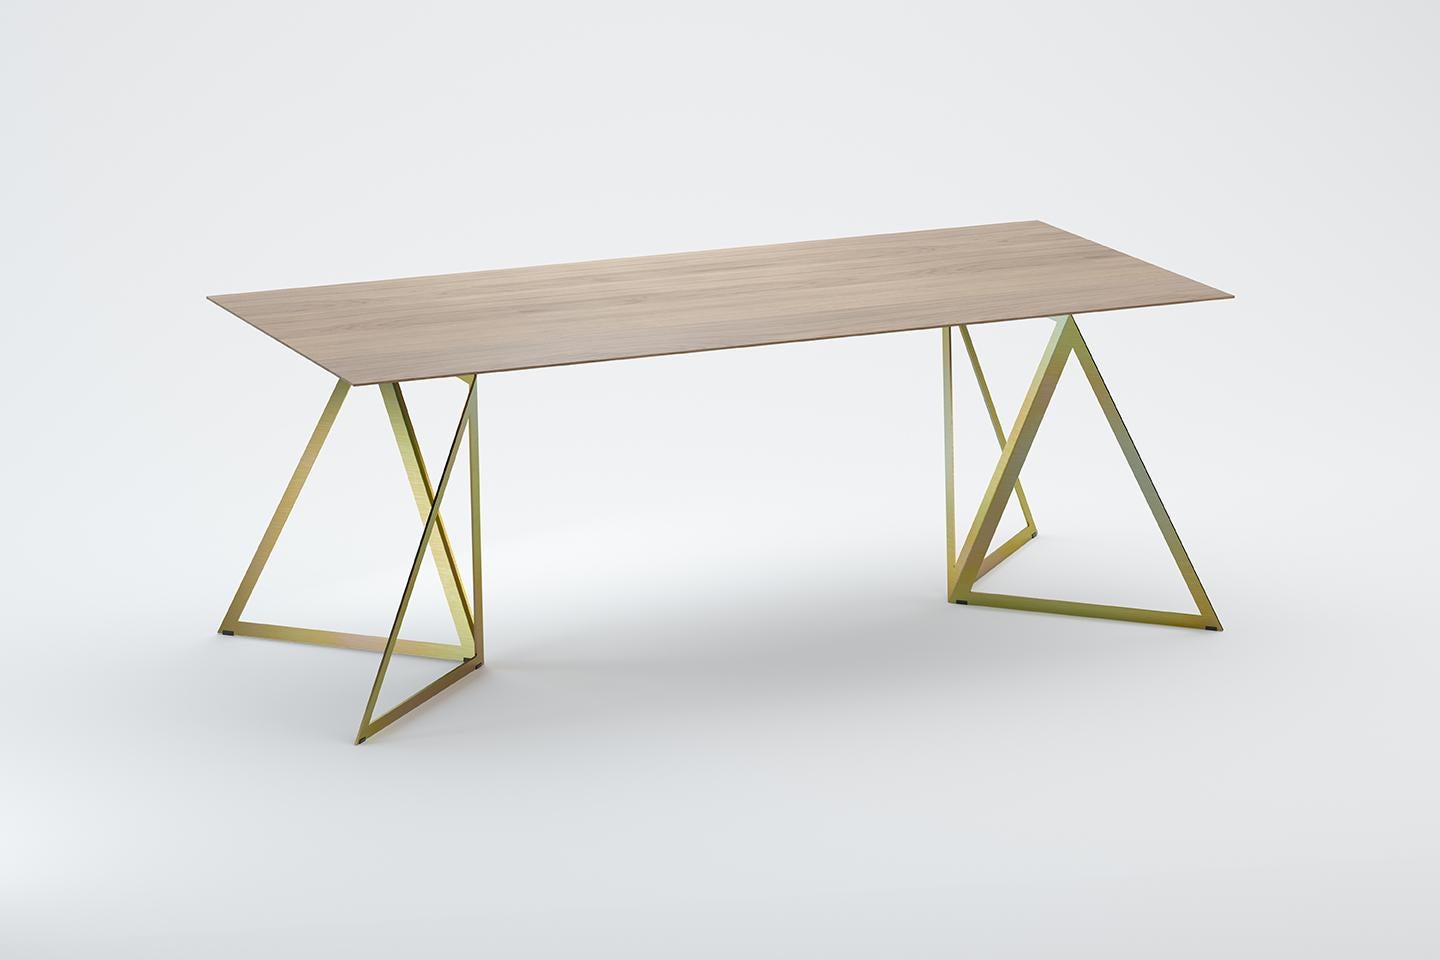 Steel stand table 200 oak by Sebastian Scherer
Dimensions: D200 x W90 x H74 cm
Materials: Oak, Steel, Wood
Also Available: Colours:Solid wood (matt lacquered or oiled): black and white stained ash / natural oak / american walnut
Steel (matt):